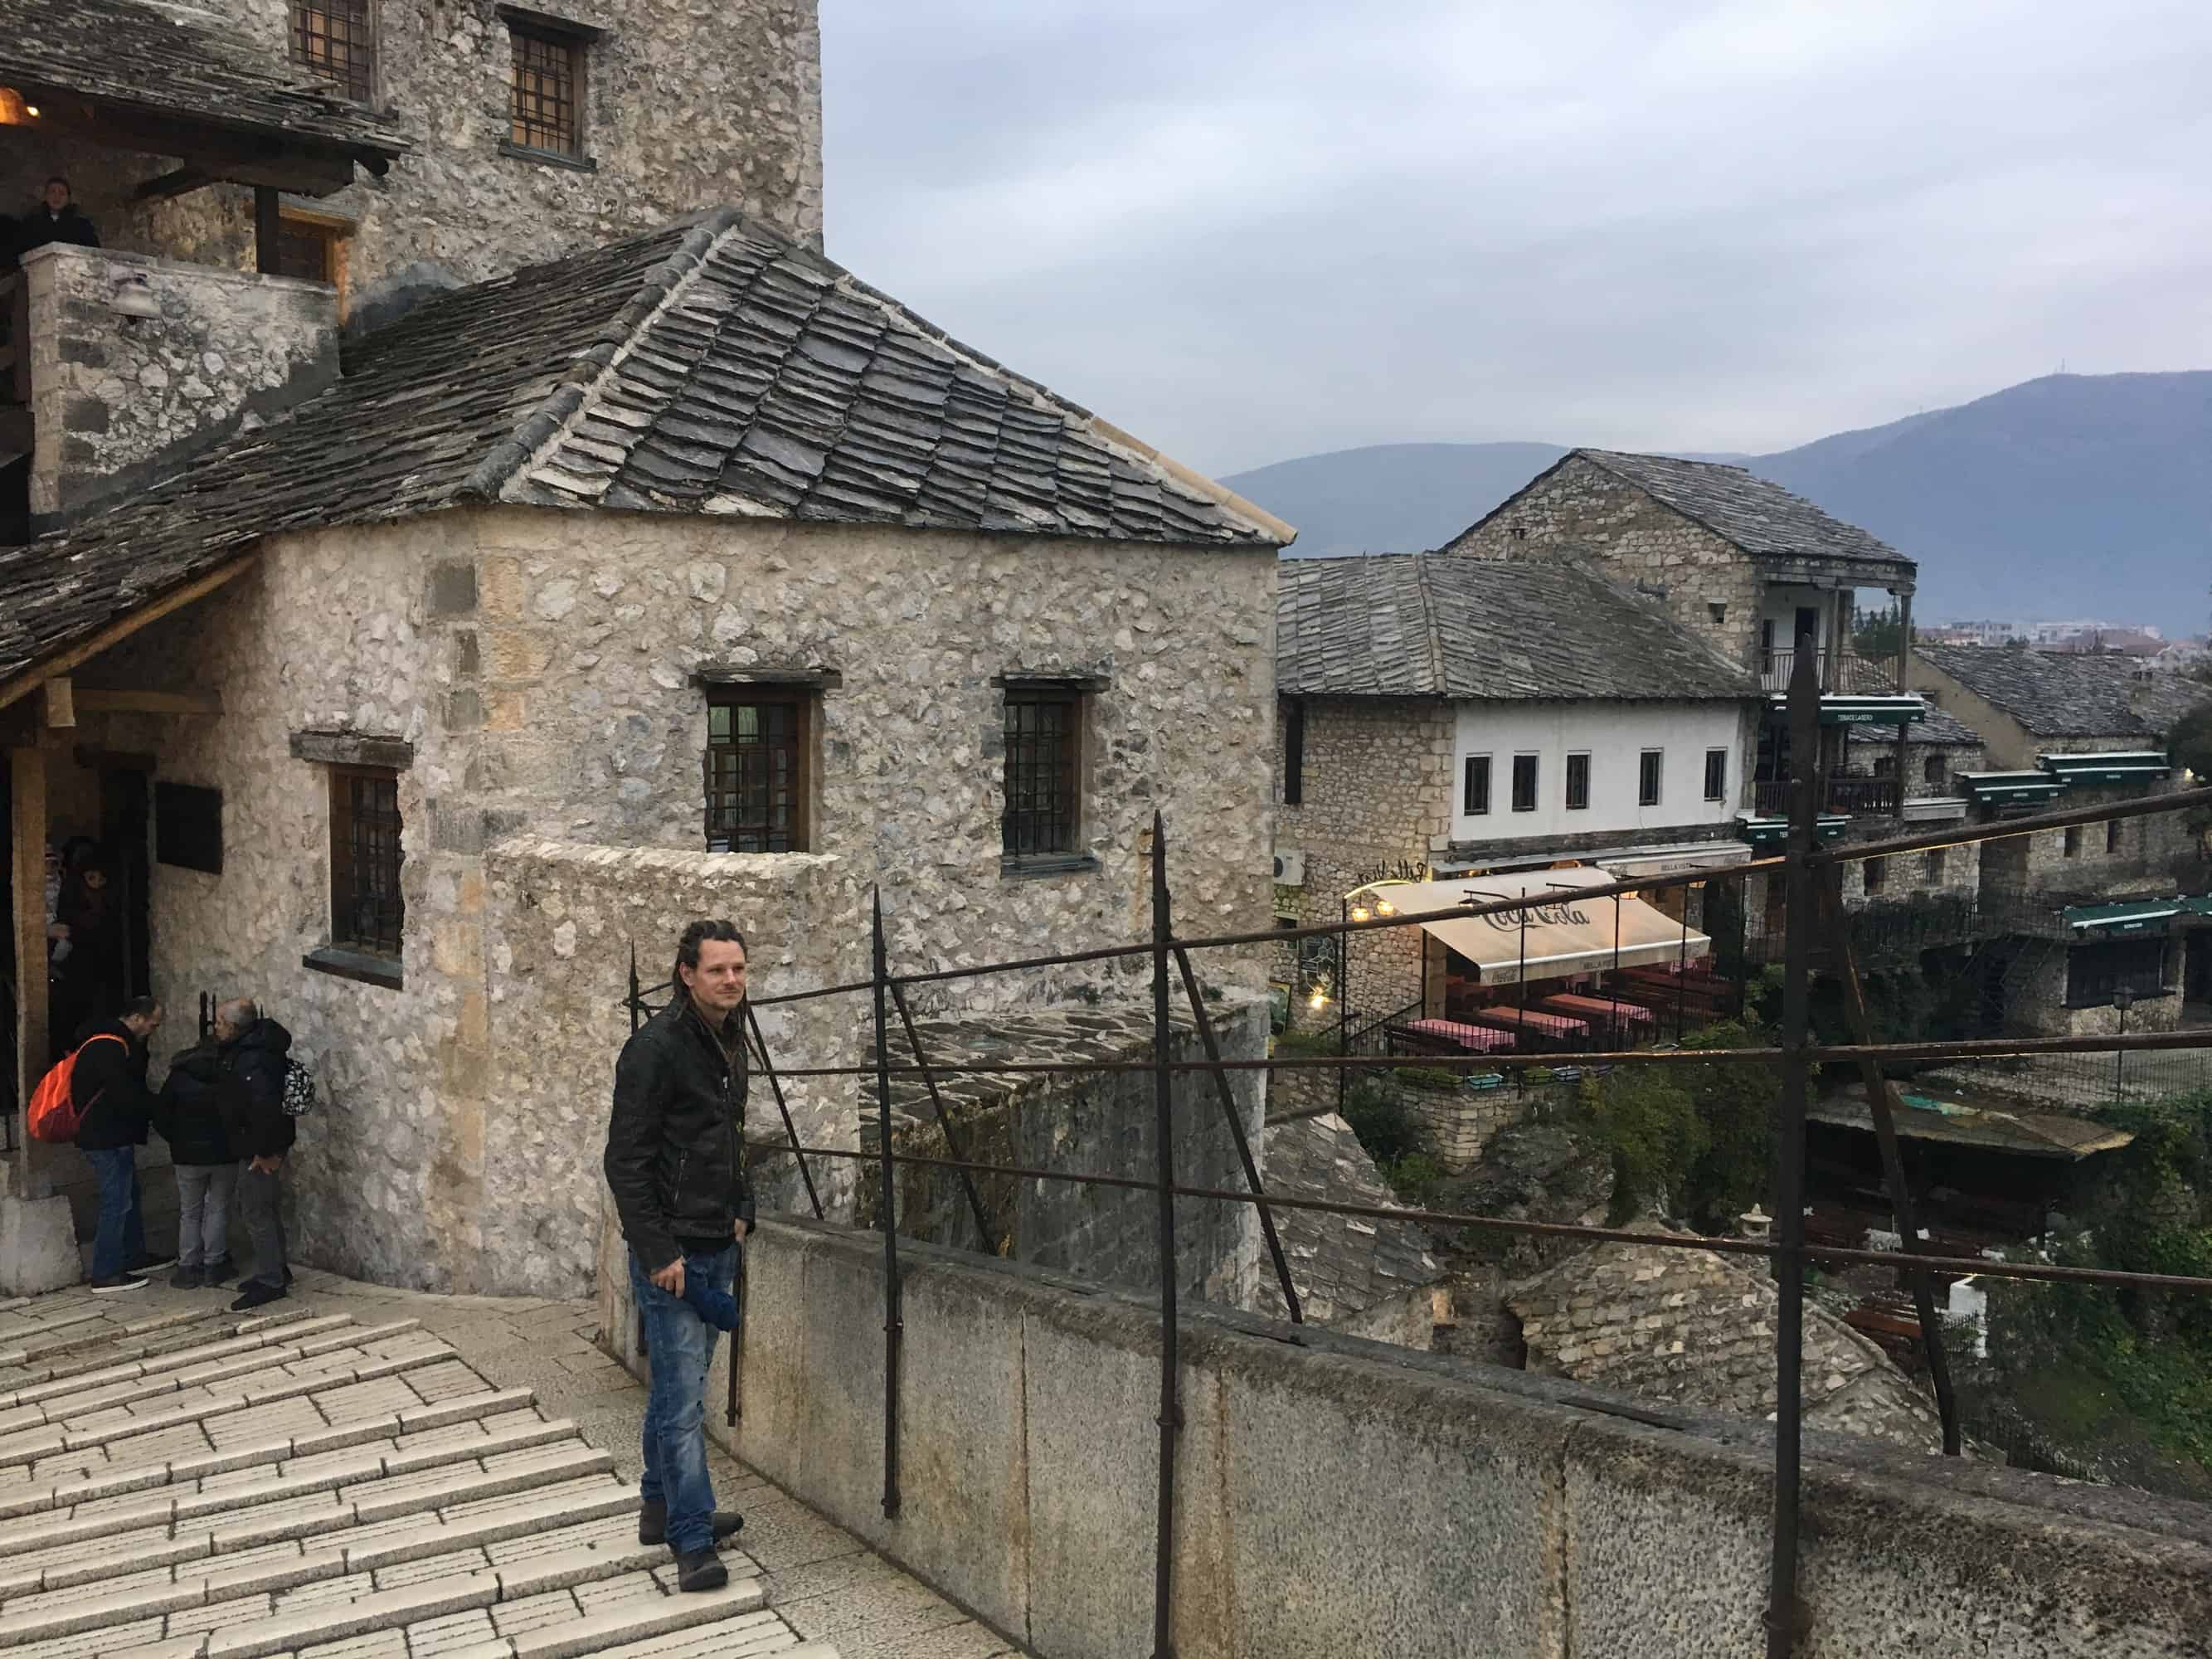 Mike on Stari Most